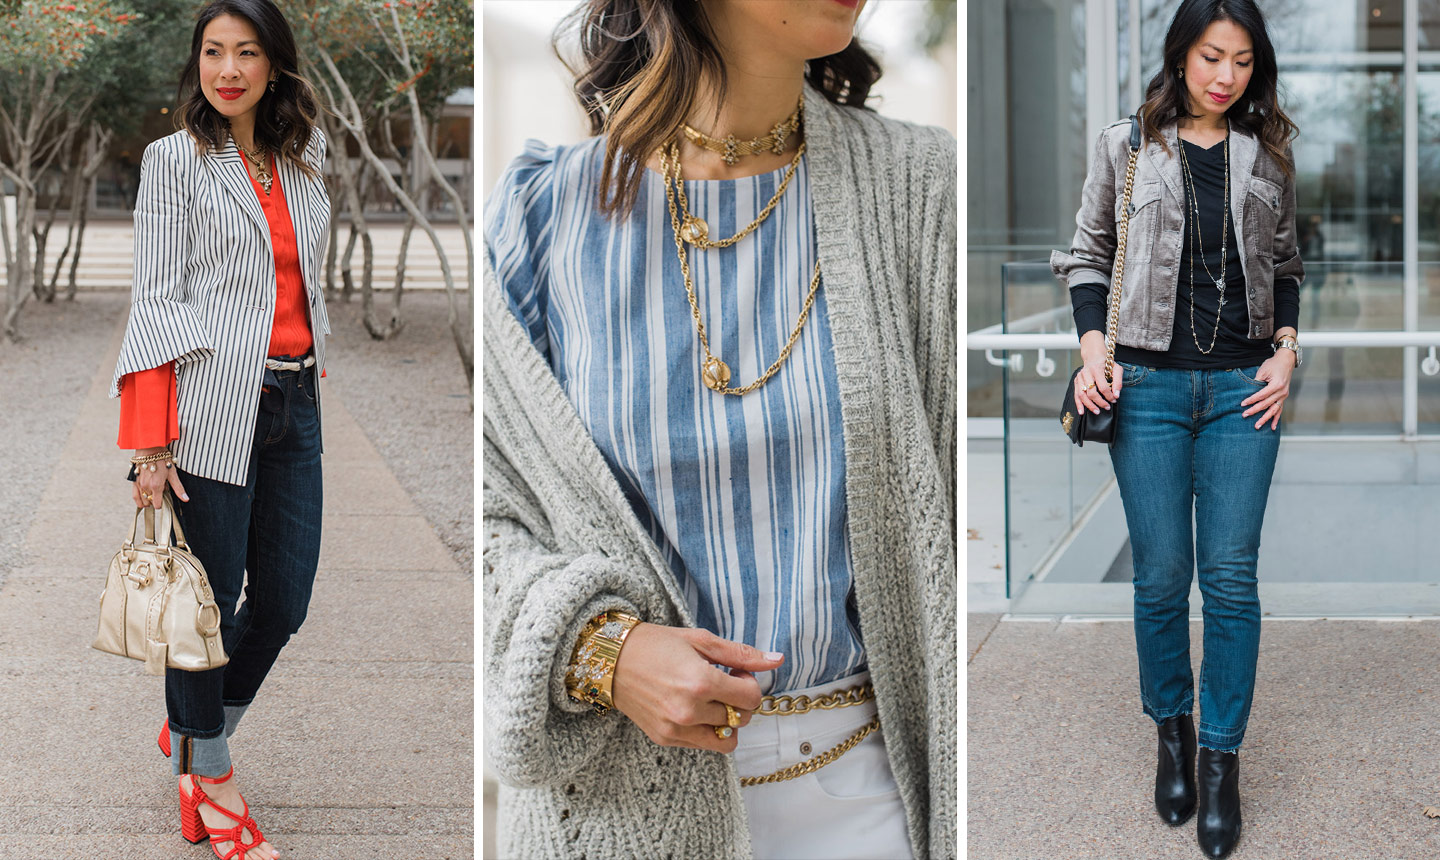 Stylish Outfit Ideas for Spring- Transitional Looks from Winter